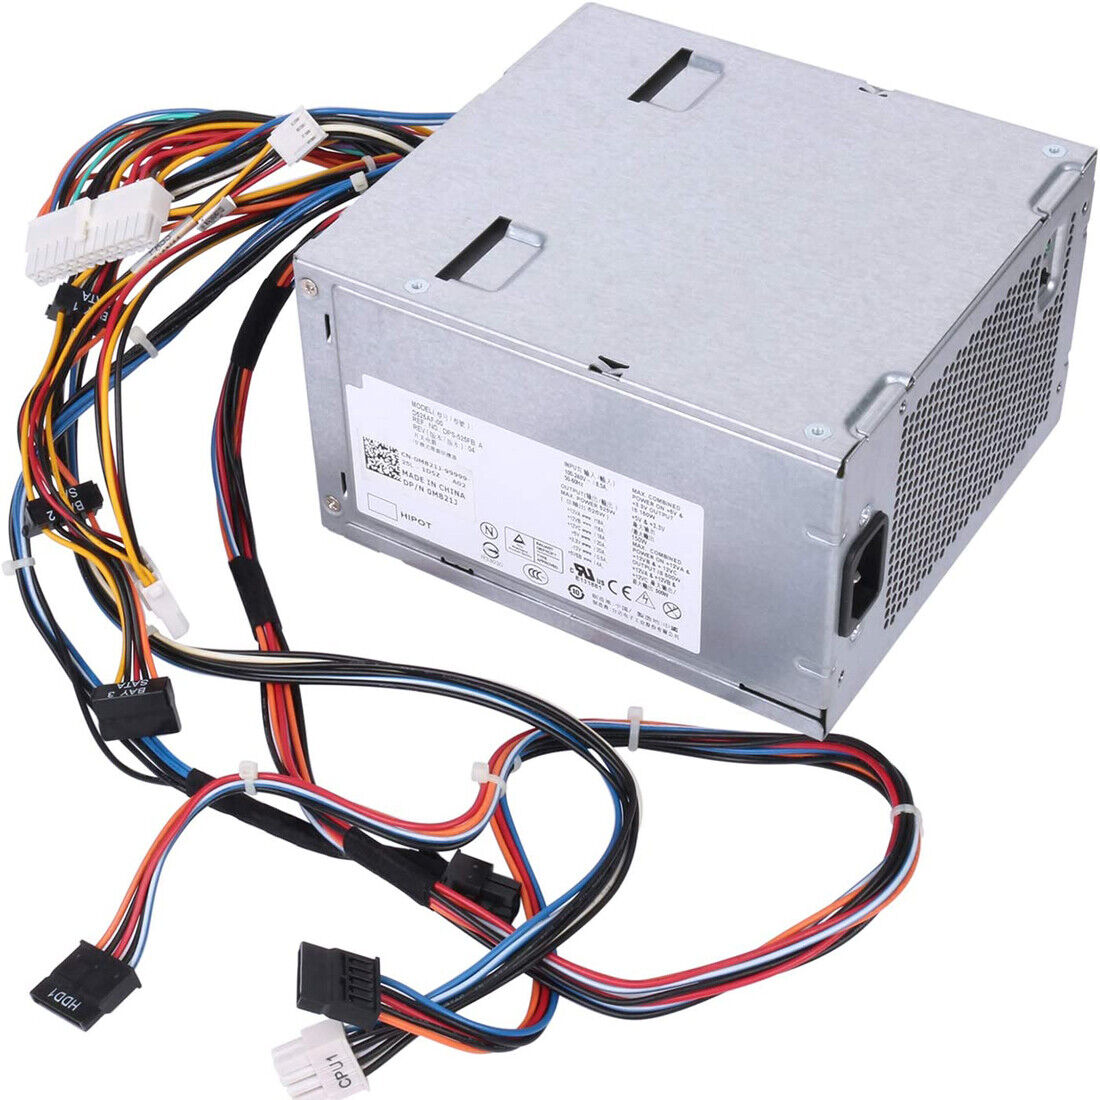 NW D525AF-00 Power Supply Fors Dell Precision T3500 6W6M1 M822J U597G X008G 525W